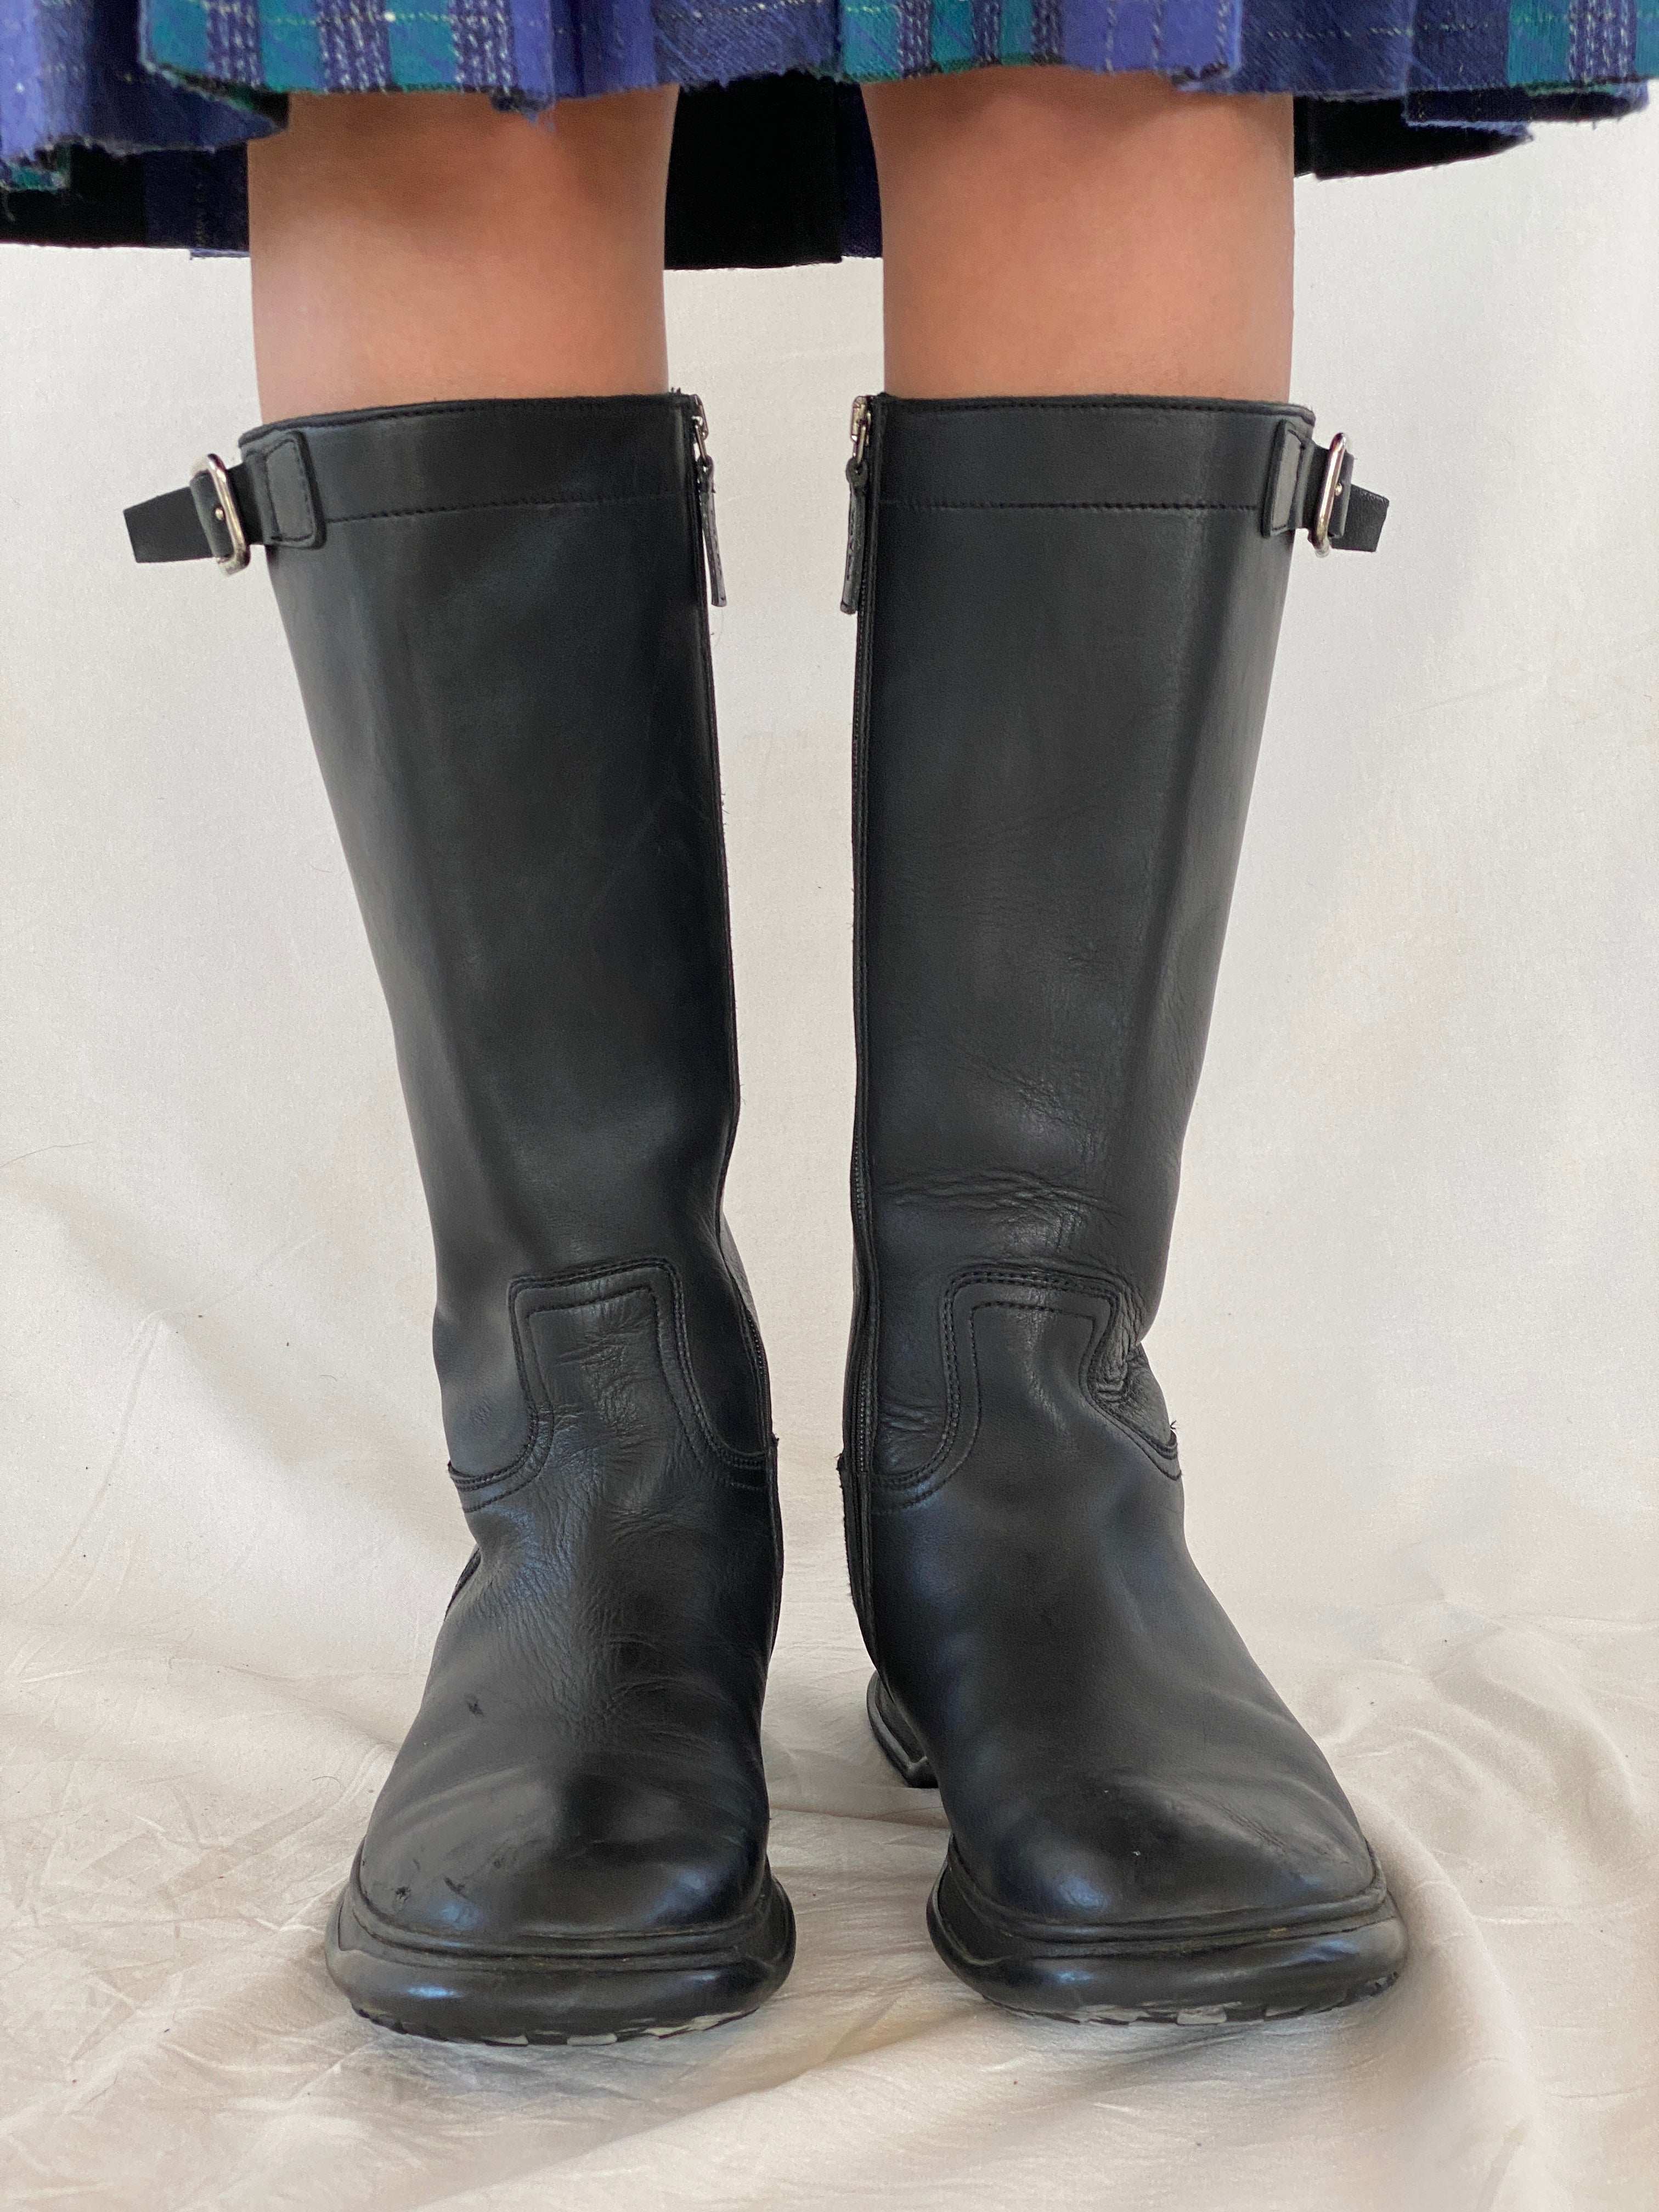 Vintage 90s PRADA Leather Moto boots - Balagan Vintage Boots 00s, 90s, Boots, Juana, NEW IN